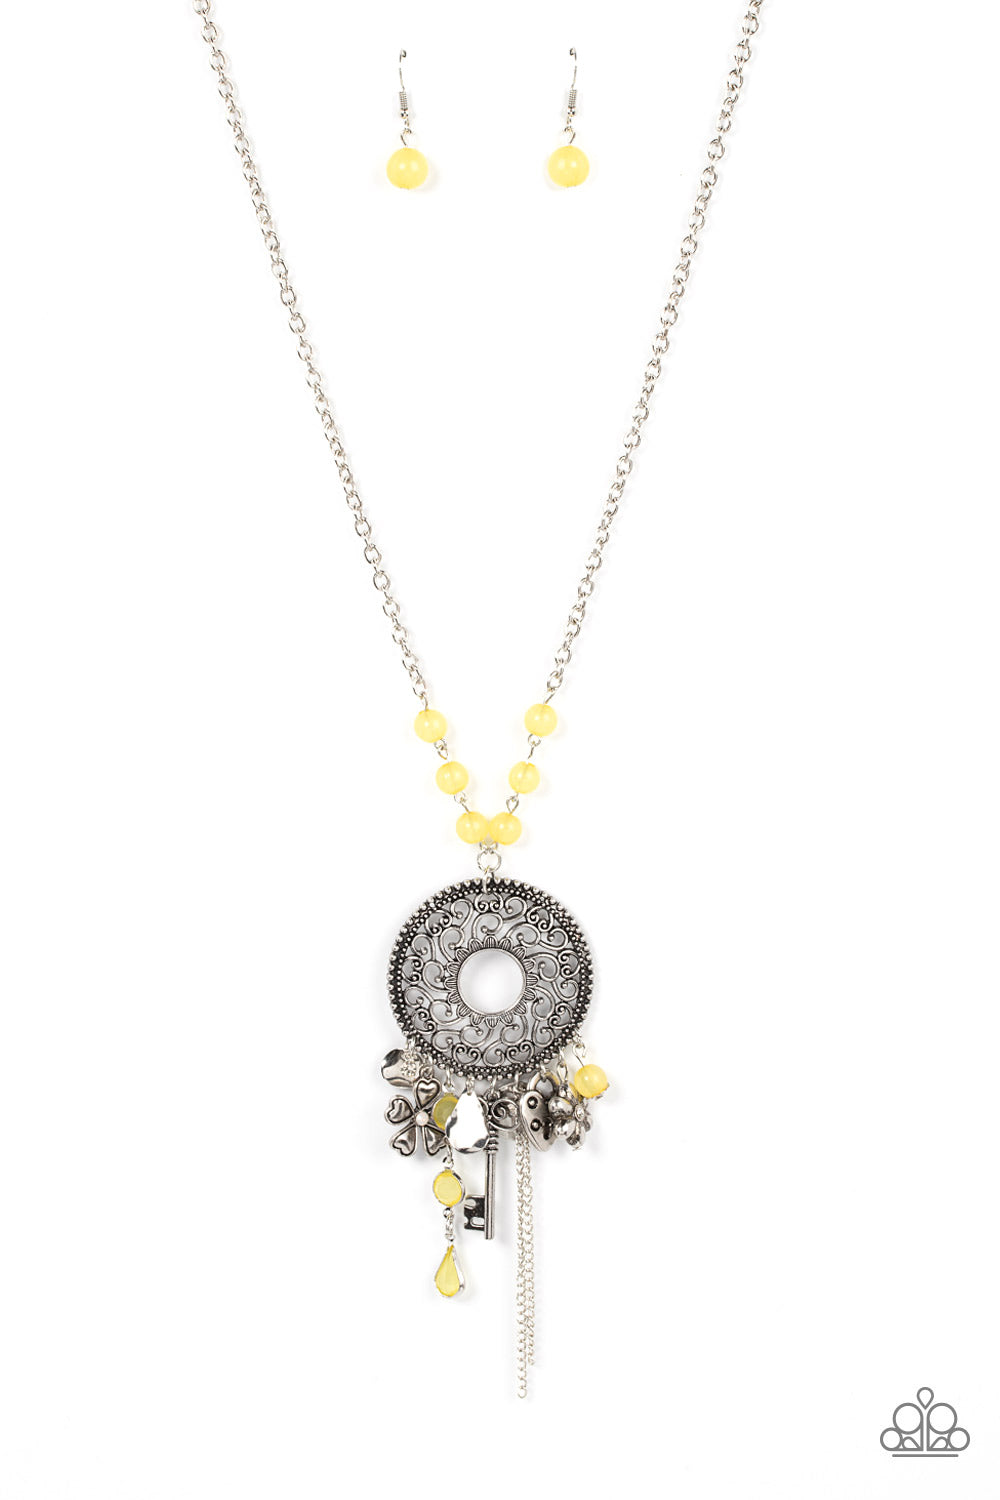 Making Memories - Yellow and Silver Charms Necklace - Paparazzi Accessories - Fashion necklace with glassy yellow beads an assortment of silver key heart and floral charms cascades from an oversized silver pendant with heart shaped vine-like filigree. The frame swings from the bottom of a yellow beaded silver chain, adding a color to the fringe. Features an adjustable clasp closure.